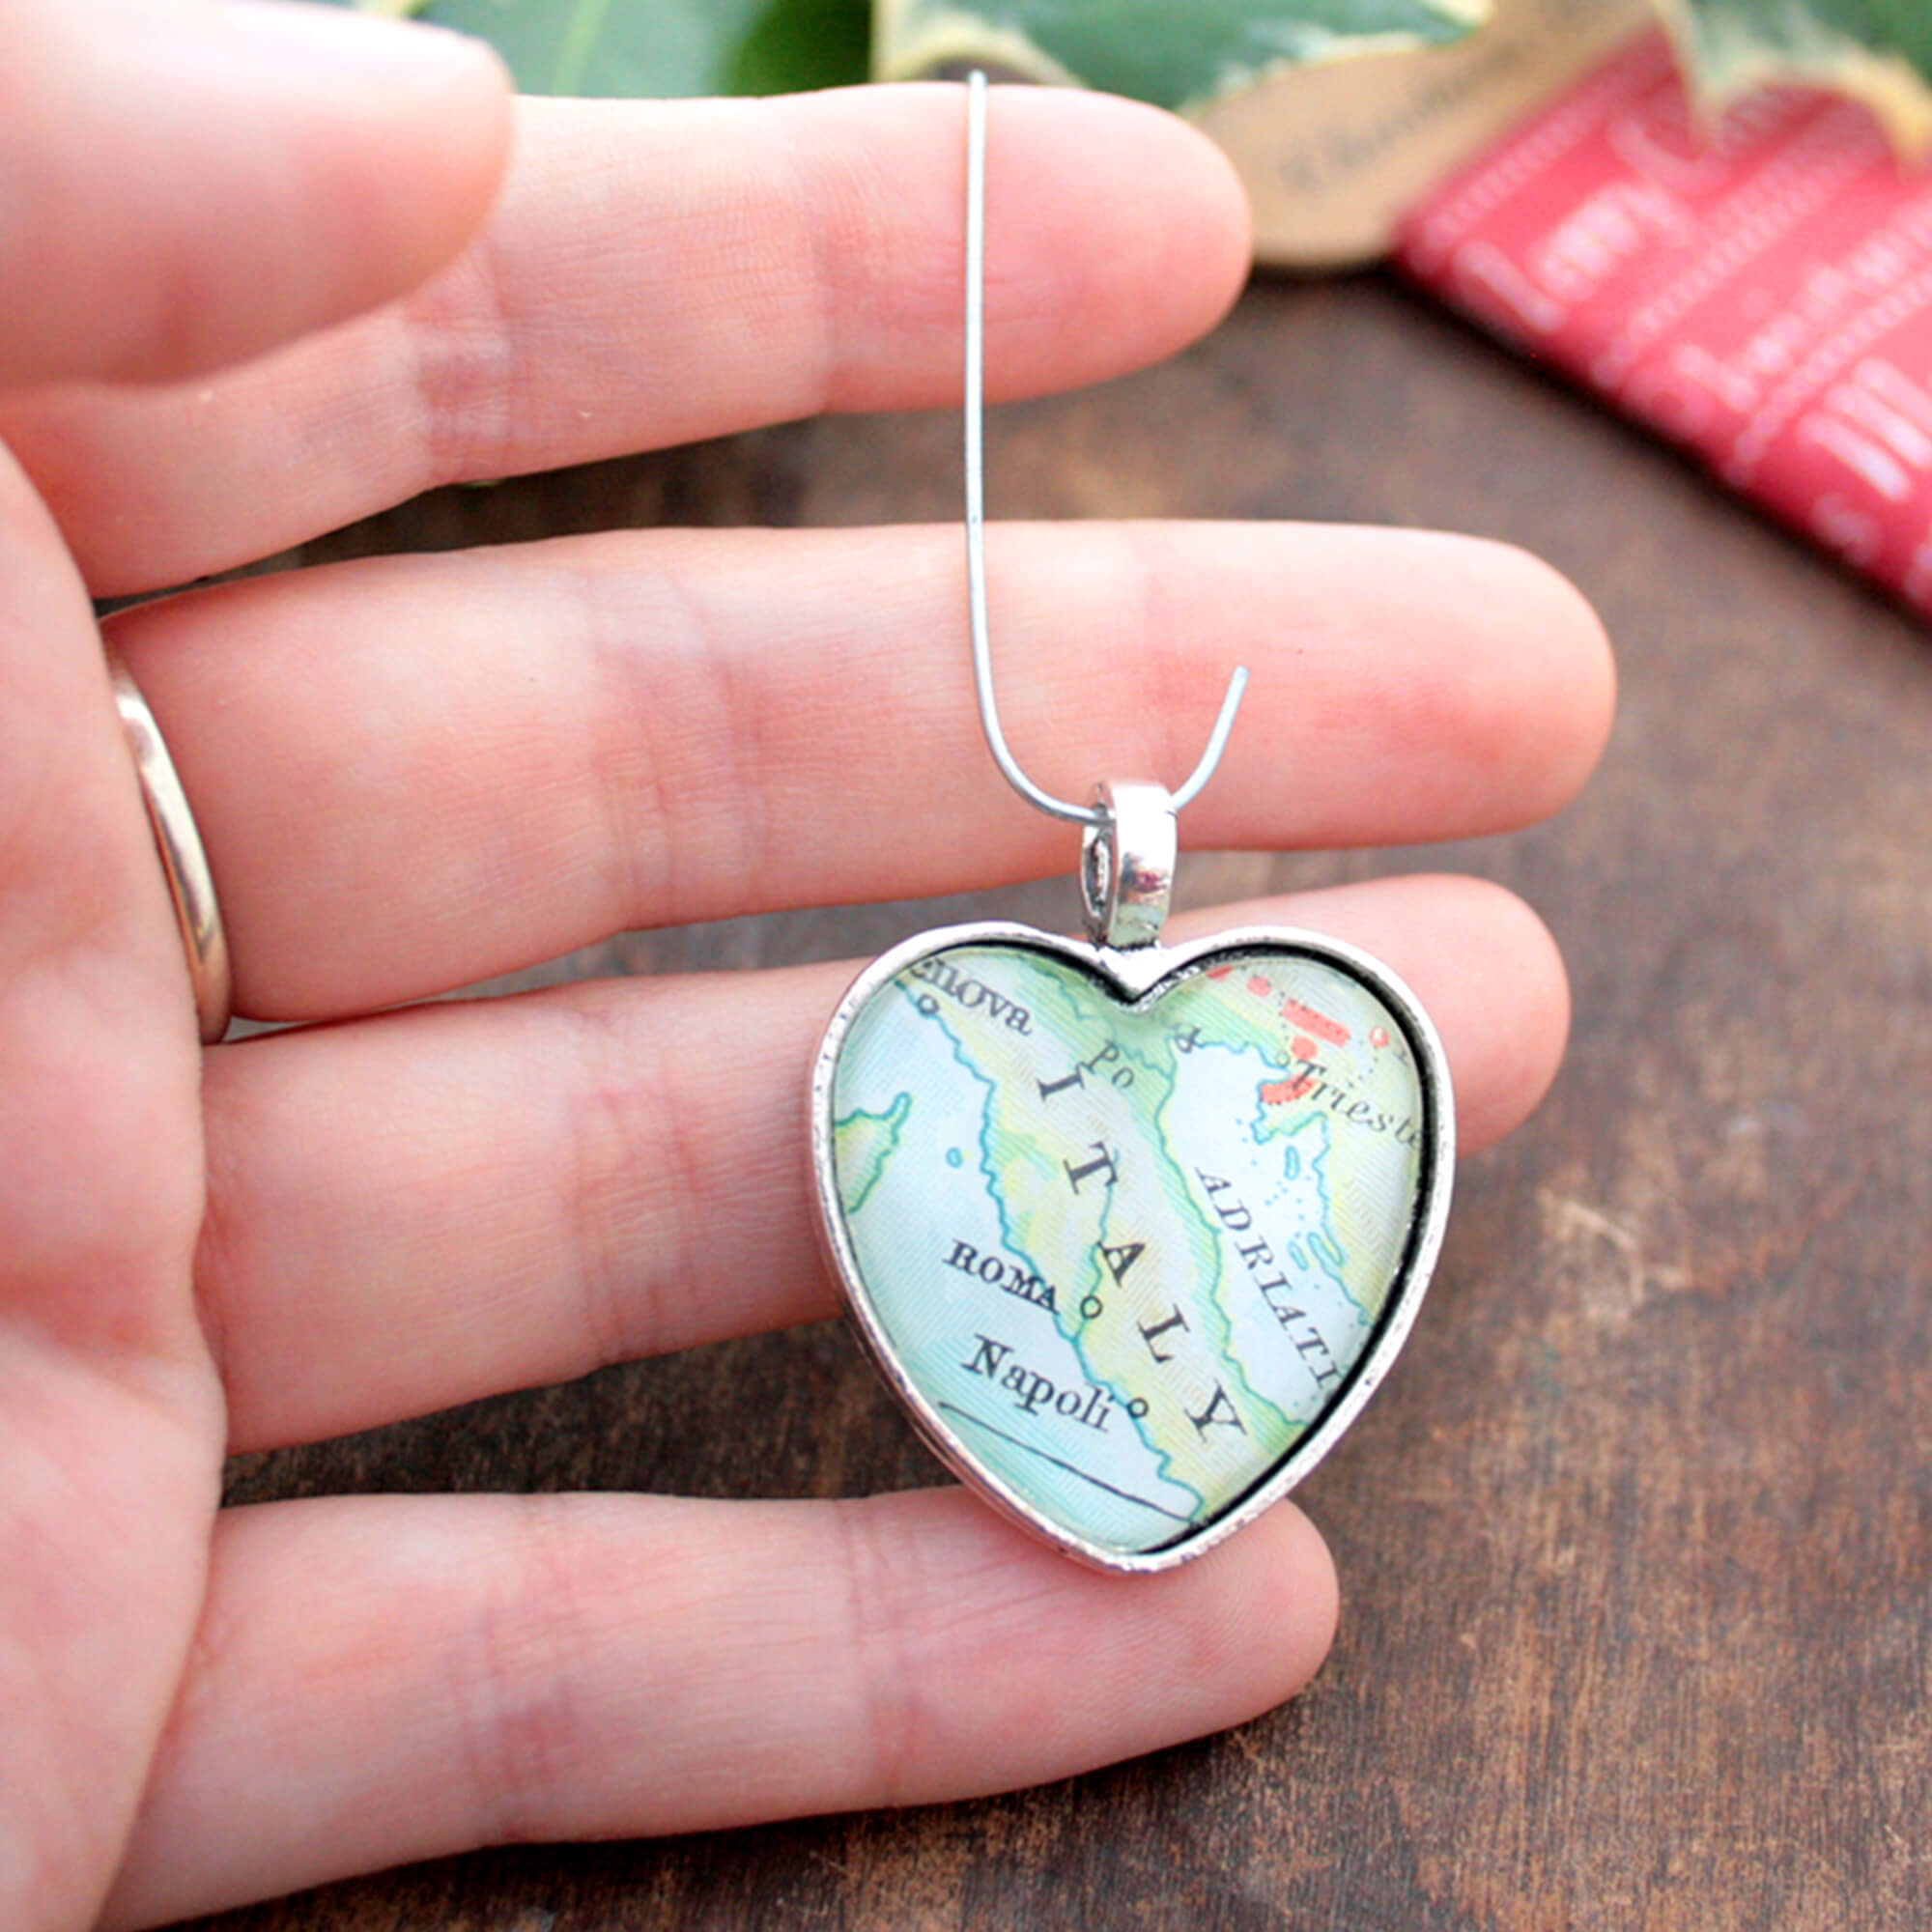 Christmas tree ornament in heart shape featuring map of the world